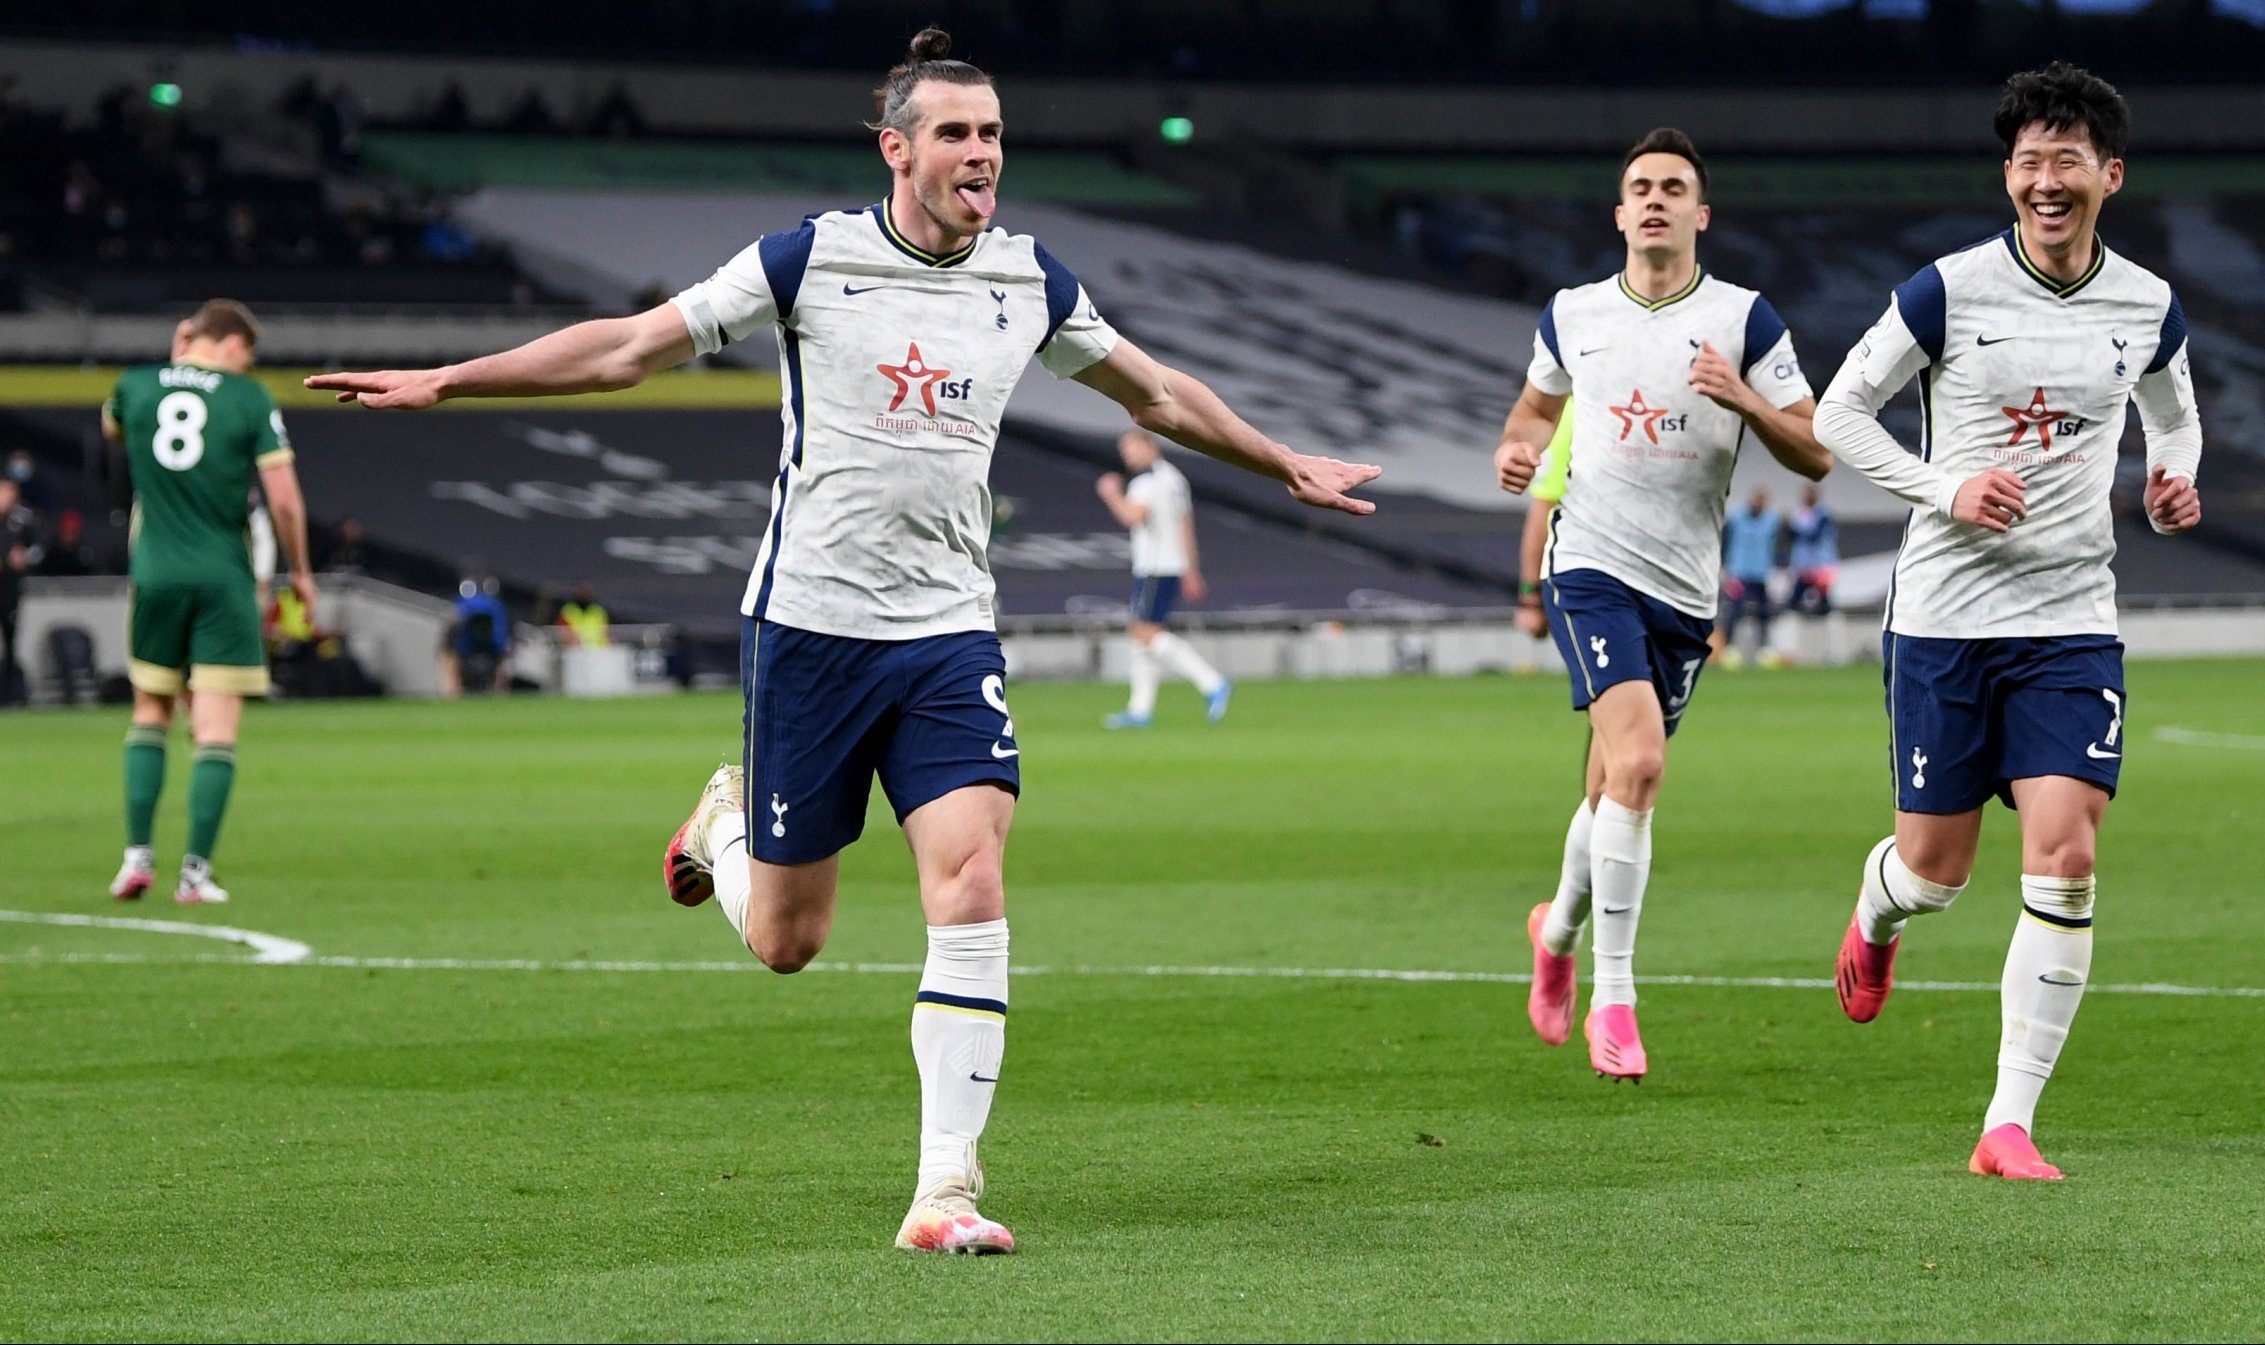 Gareth Bale celebrates scoring his third goal in Spurs' win over Sheffield United in the Premier League